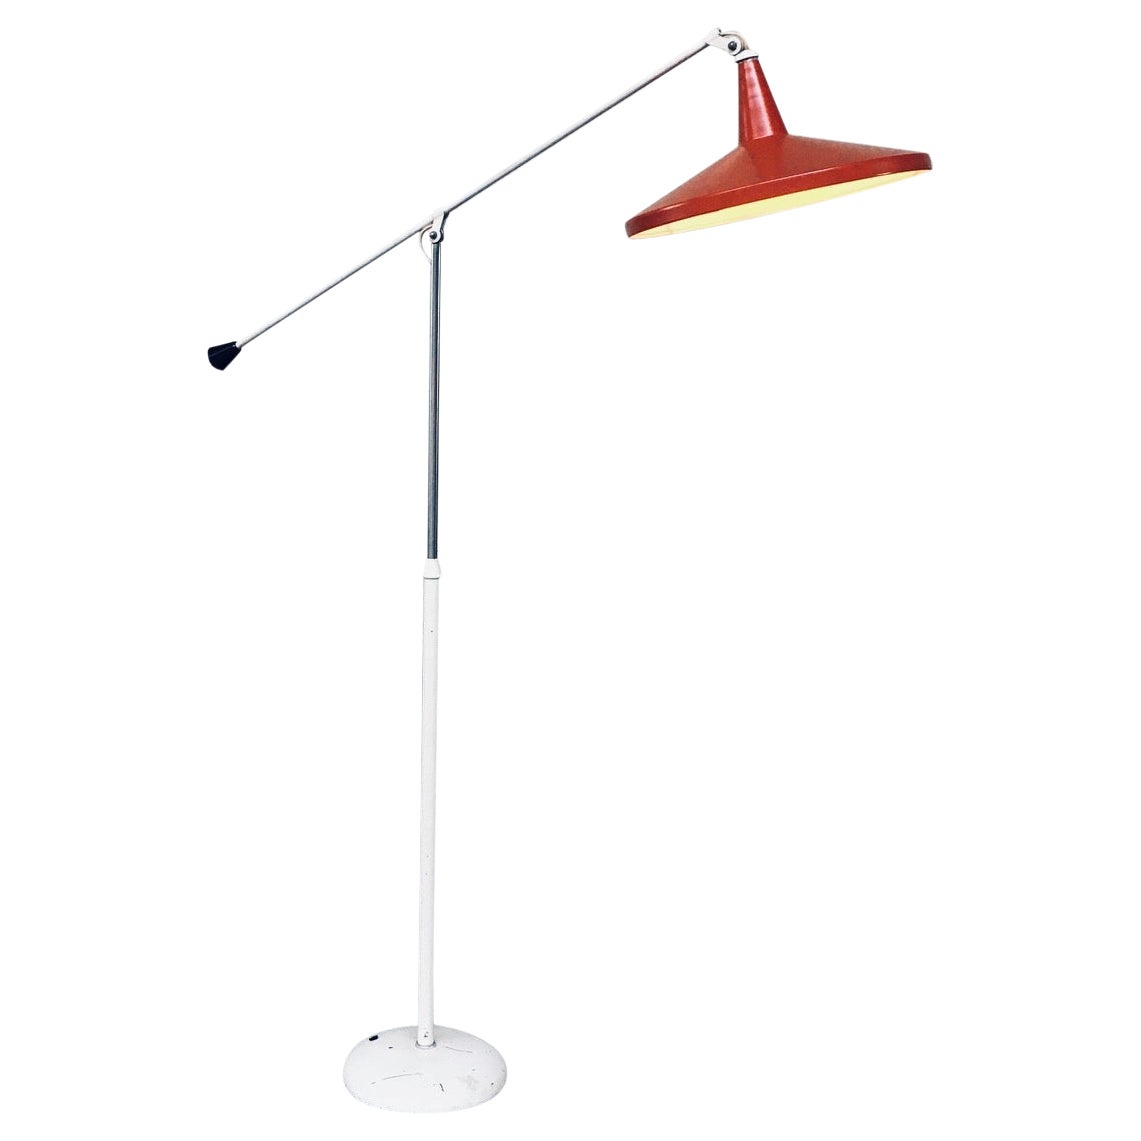 "PANAMA" Floor Lamp in red by Wim Rietveld for Gispen, 1957